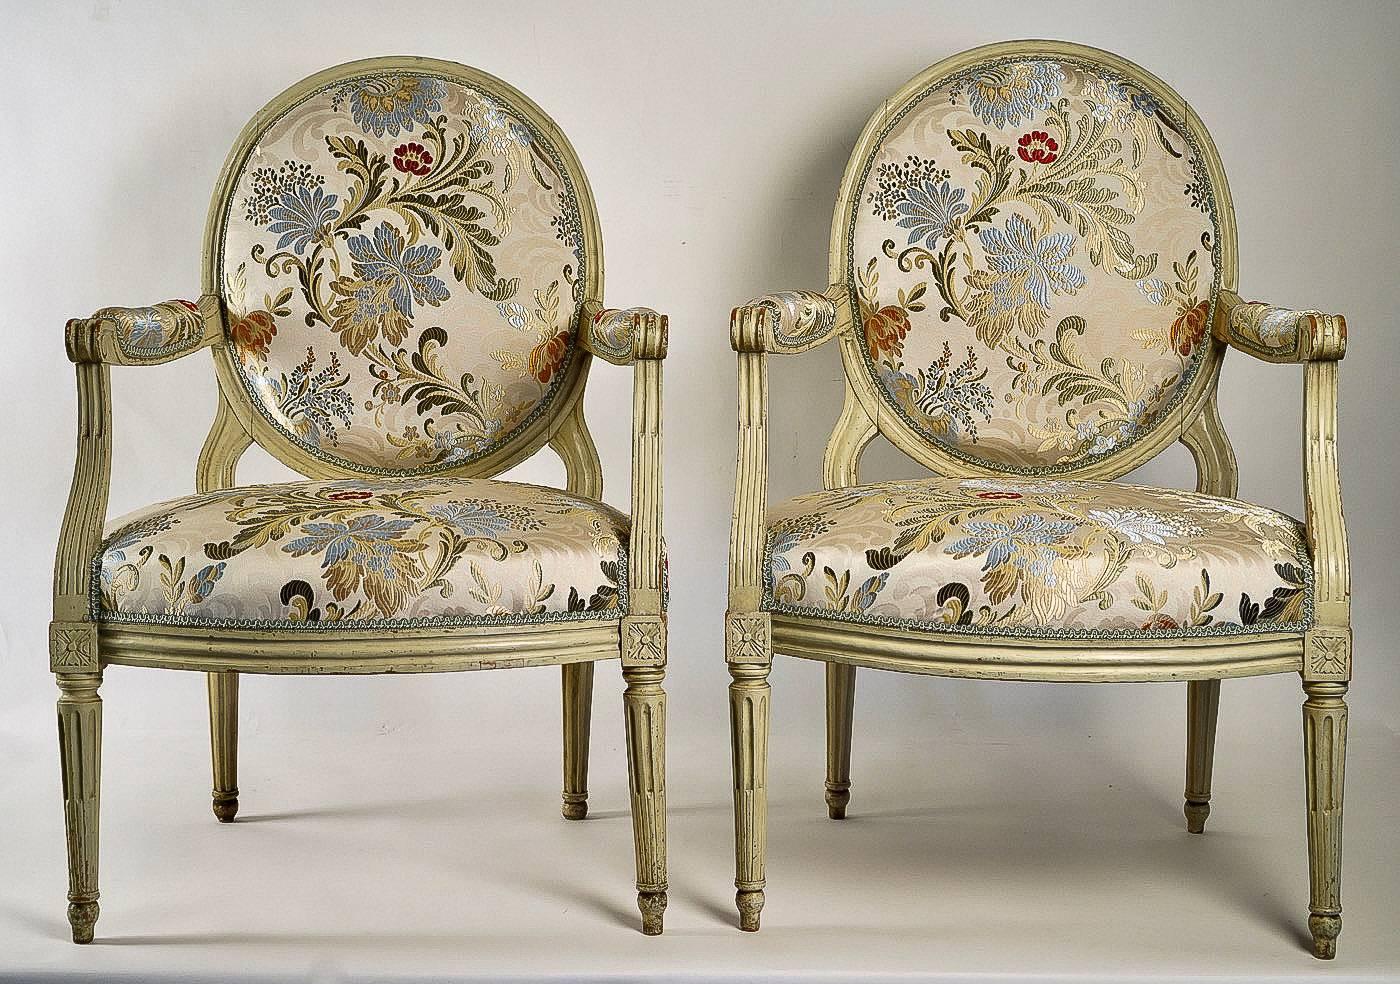 French 18th Century Lacquered Beechwood Four-Piece Salon Suite Louis XVI Period For Sale 9